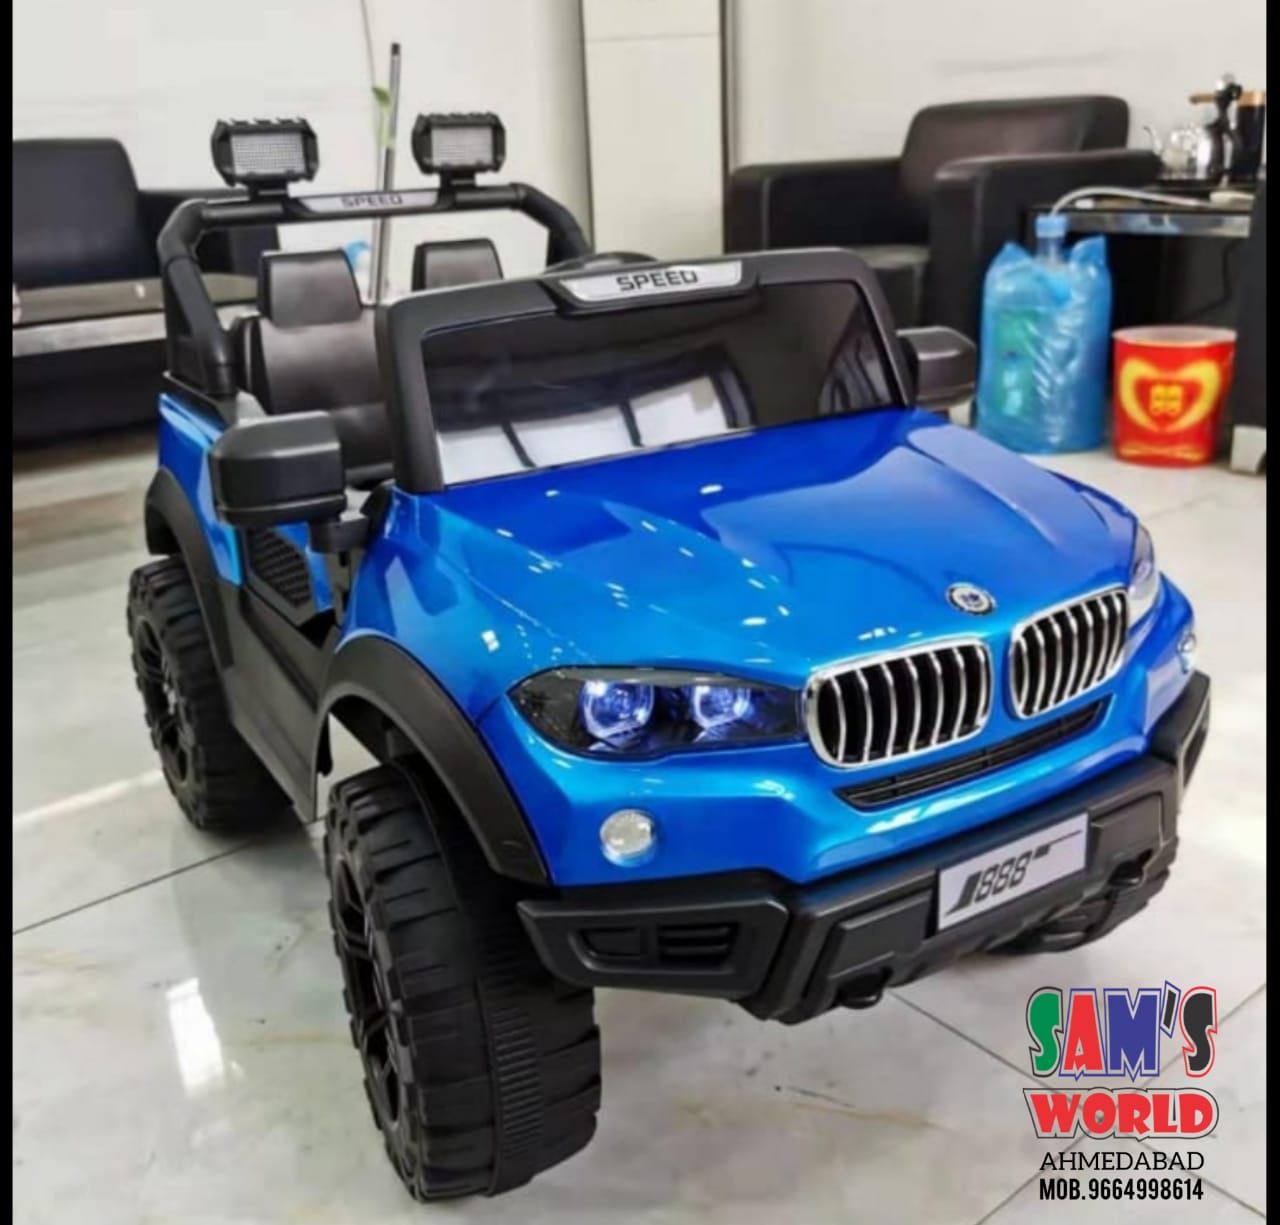 Ride-On Car 12V Rechargeable Battery-Operated Electric bmw Speed Jeep For Kids - samstoy.in